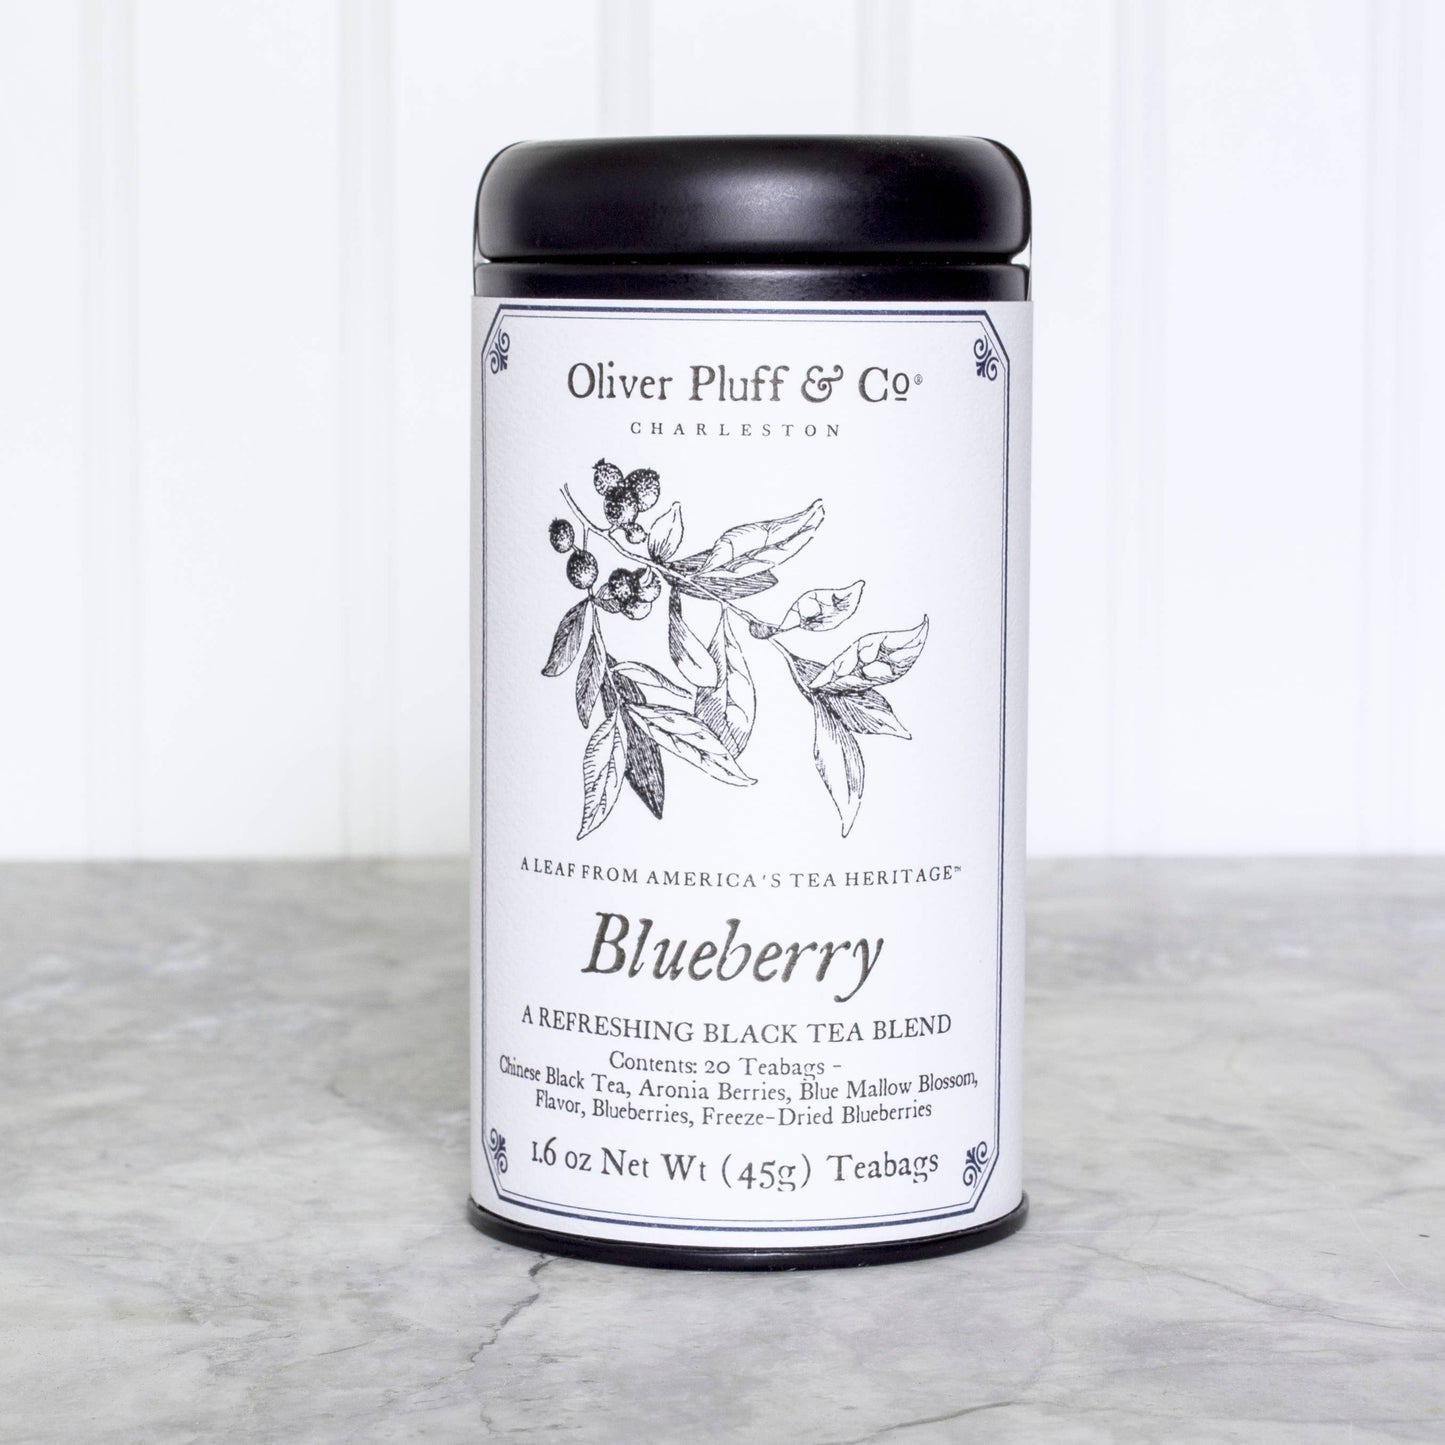 Oliver Pluff & Company - Blueberry - 20 teabags in Signature Tea Tin